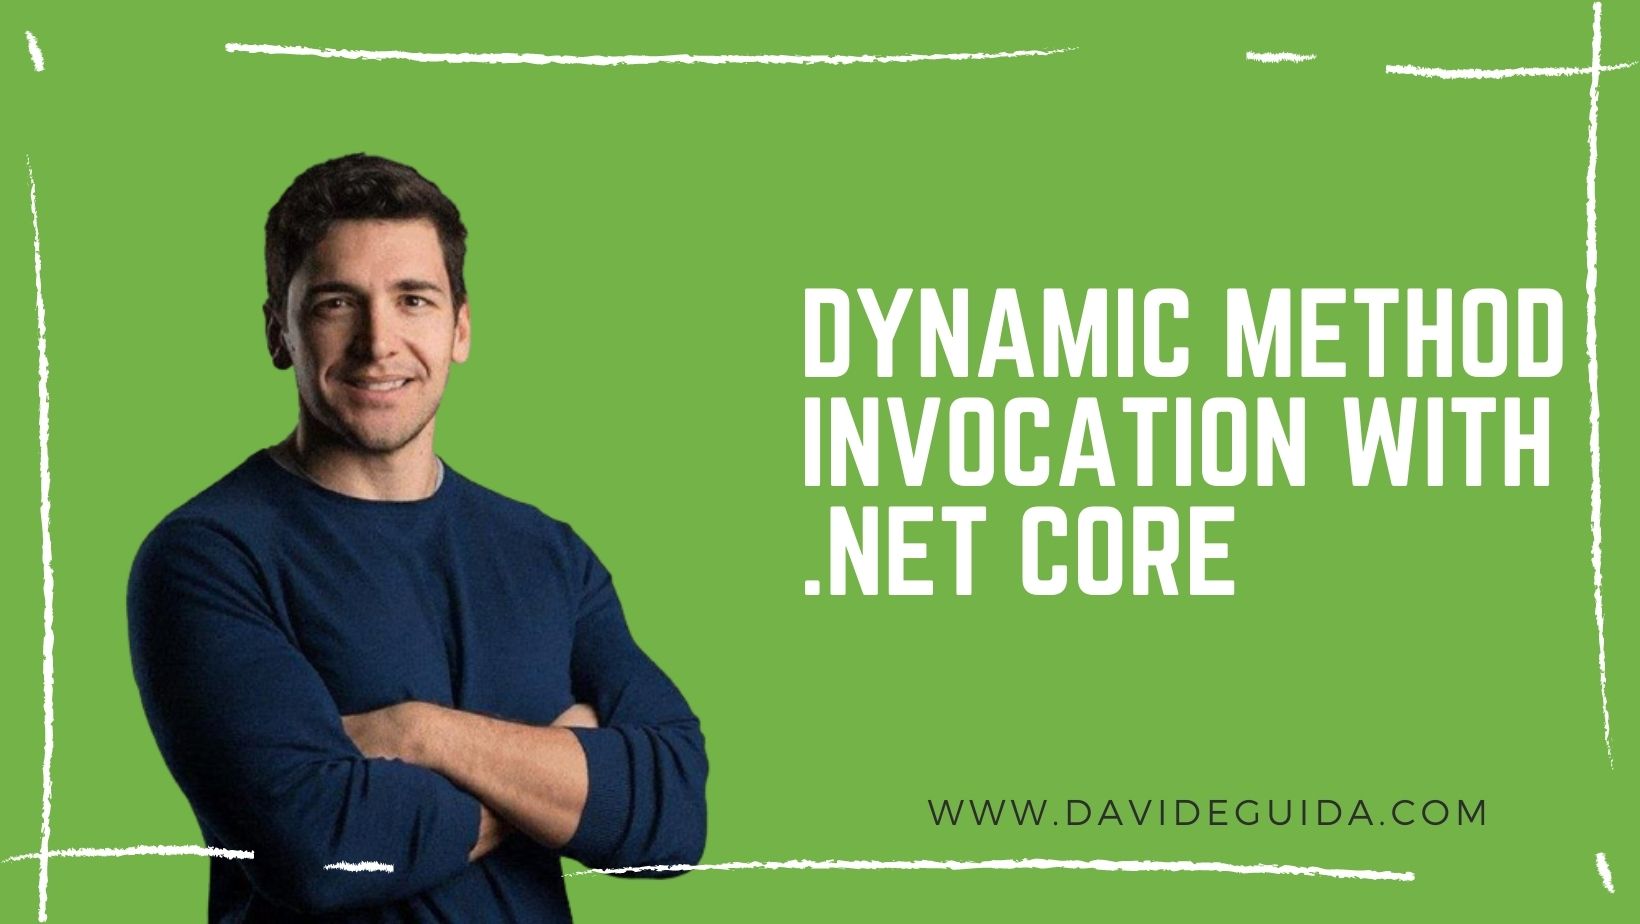 Dynamic method invocation with .NET Core